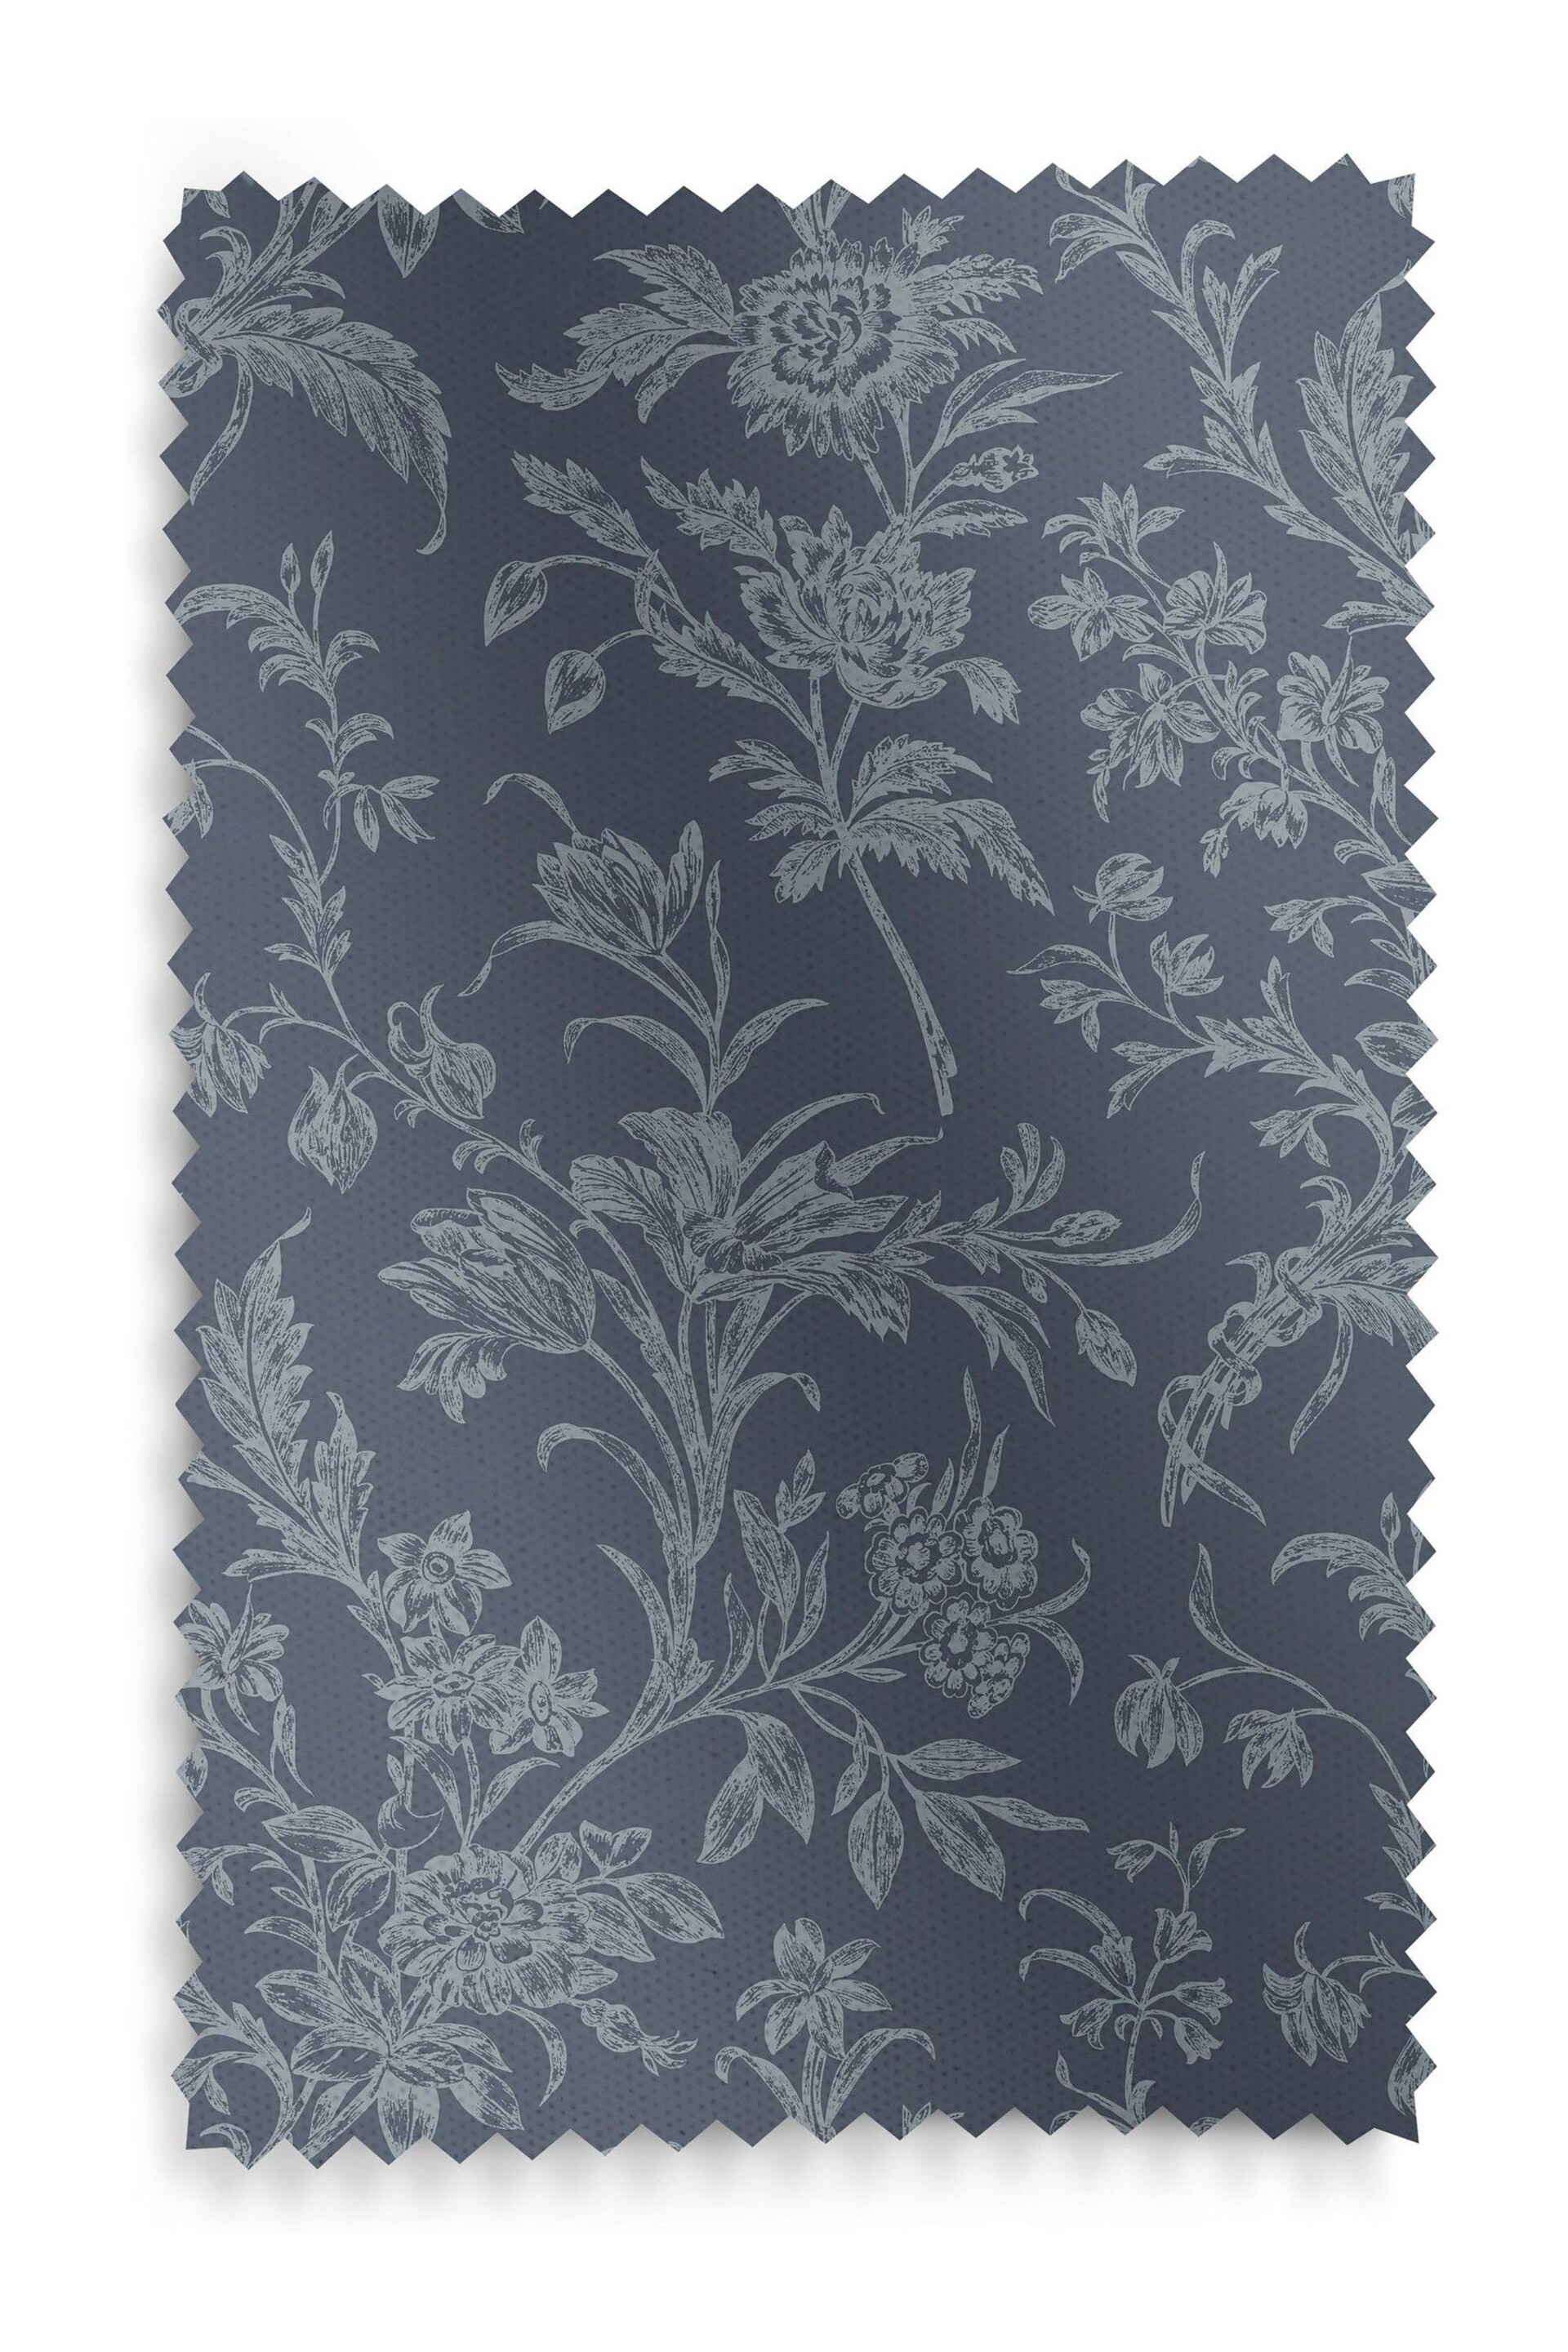 Laura Ashley Midnight Navy Blue Lloyd Made to Measure Curtains - Image 9 of 9